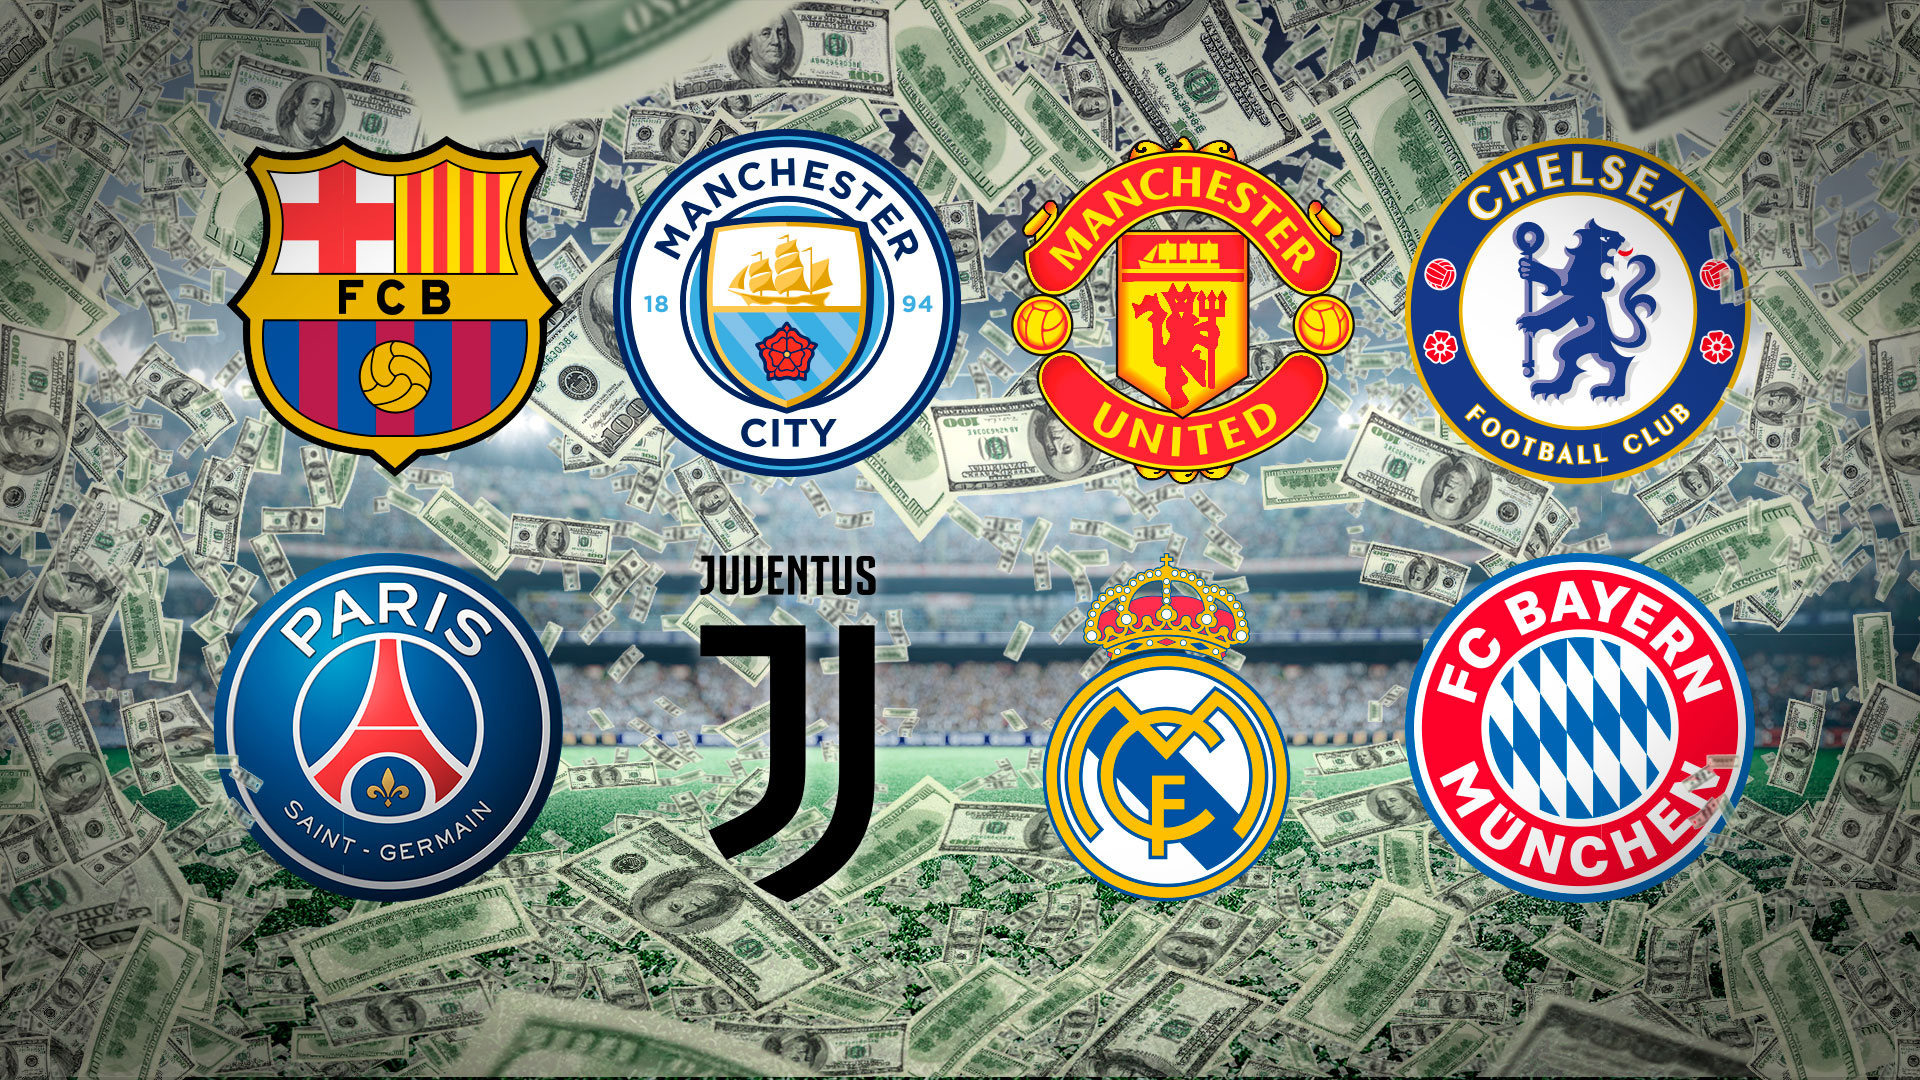 escudos Barcelona, Manchester City, Manchester United, Chelsea, PSG, Juventus, Real Madrid y Bayern Munich billetes